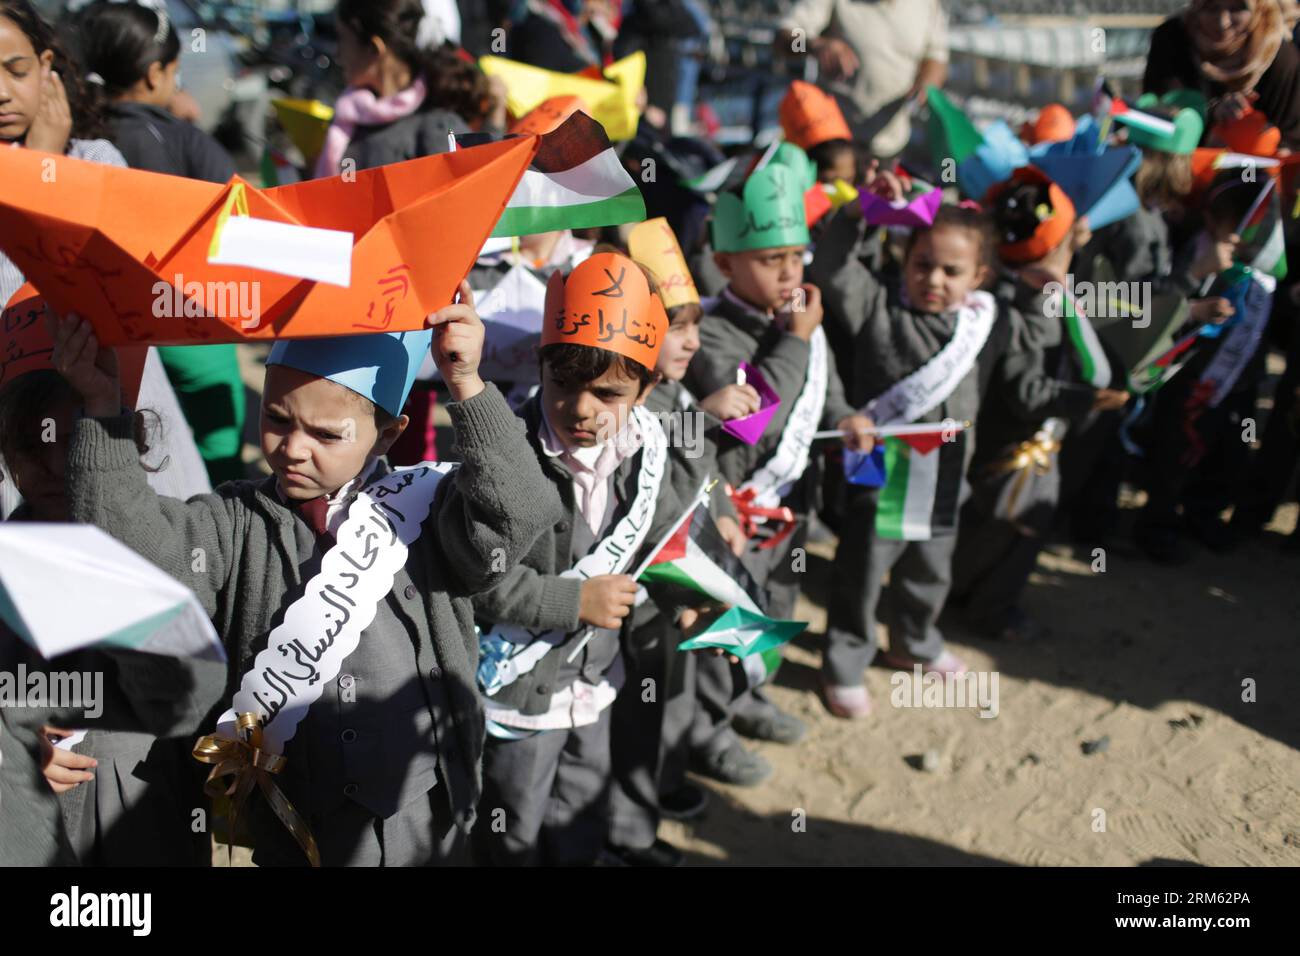 Bildnummer: 60775402  Datum: 30.11.2013  Copyright: imago/Xinhua     Palestinian children hold banners and Palestinian national flags during a protest against Israel s maritime blockade on the Gaza Strip at a port in Gaza City, Nov. 30, 2013. (Xinhua/Wissam Nassar) MIDEAST-GAZA-PROTEST PUBLICATIONxNOTxINxCHN Gesellschaft Politik Demo Protest xcb x0x 2013 quer premiumd Stock Photo